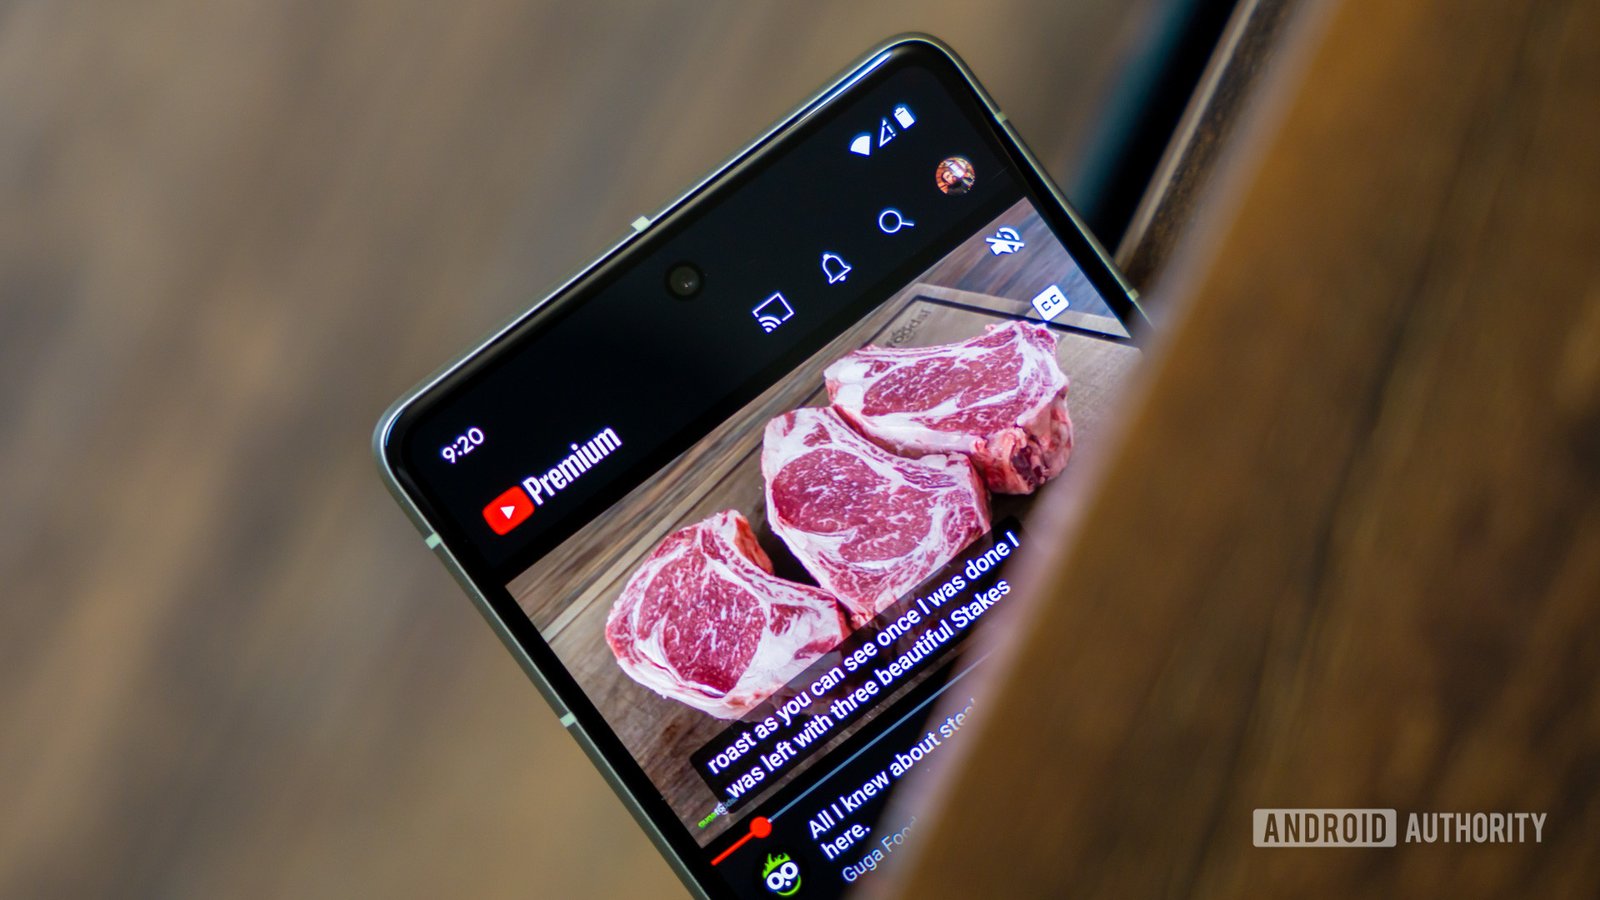 More YouTube Premium plans are on the way